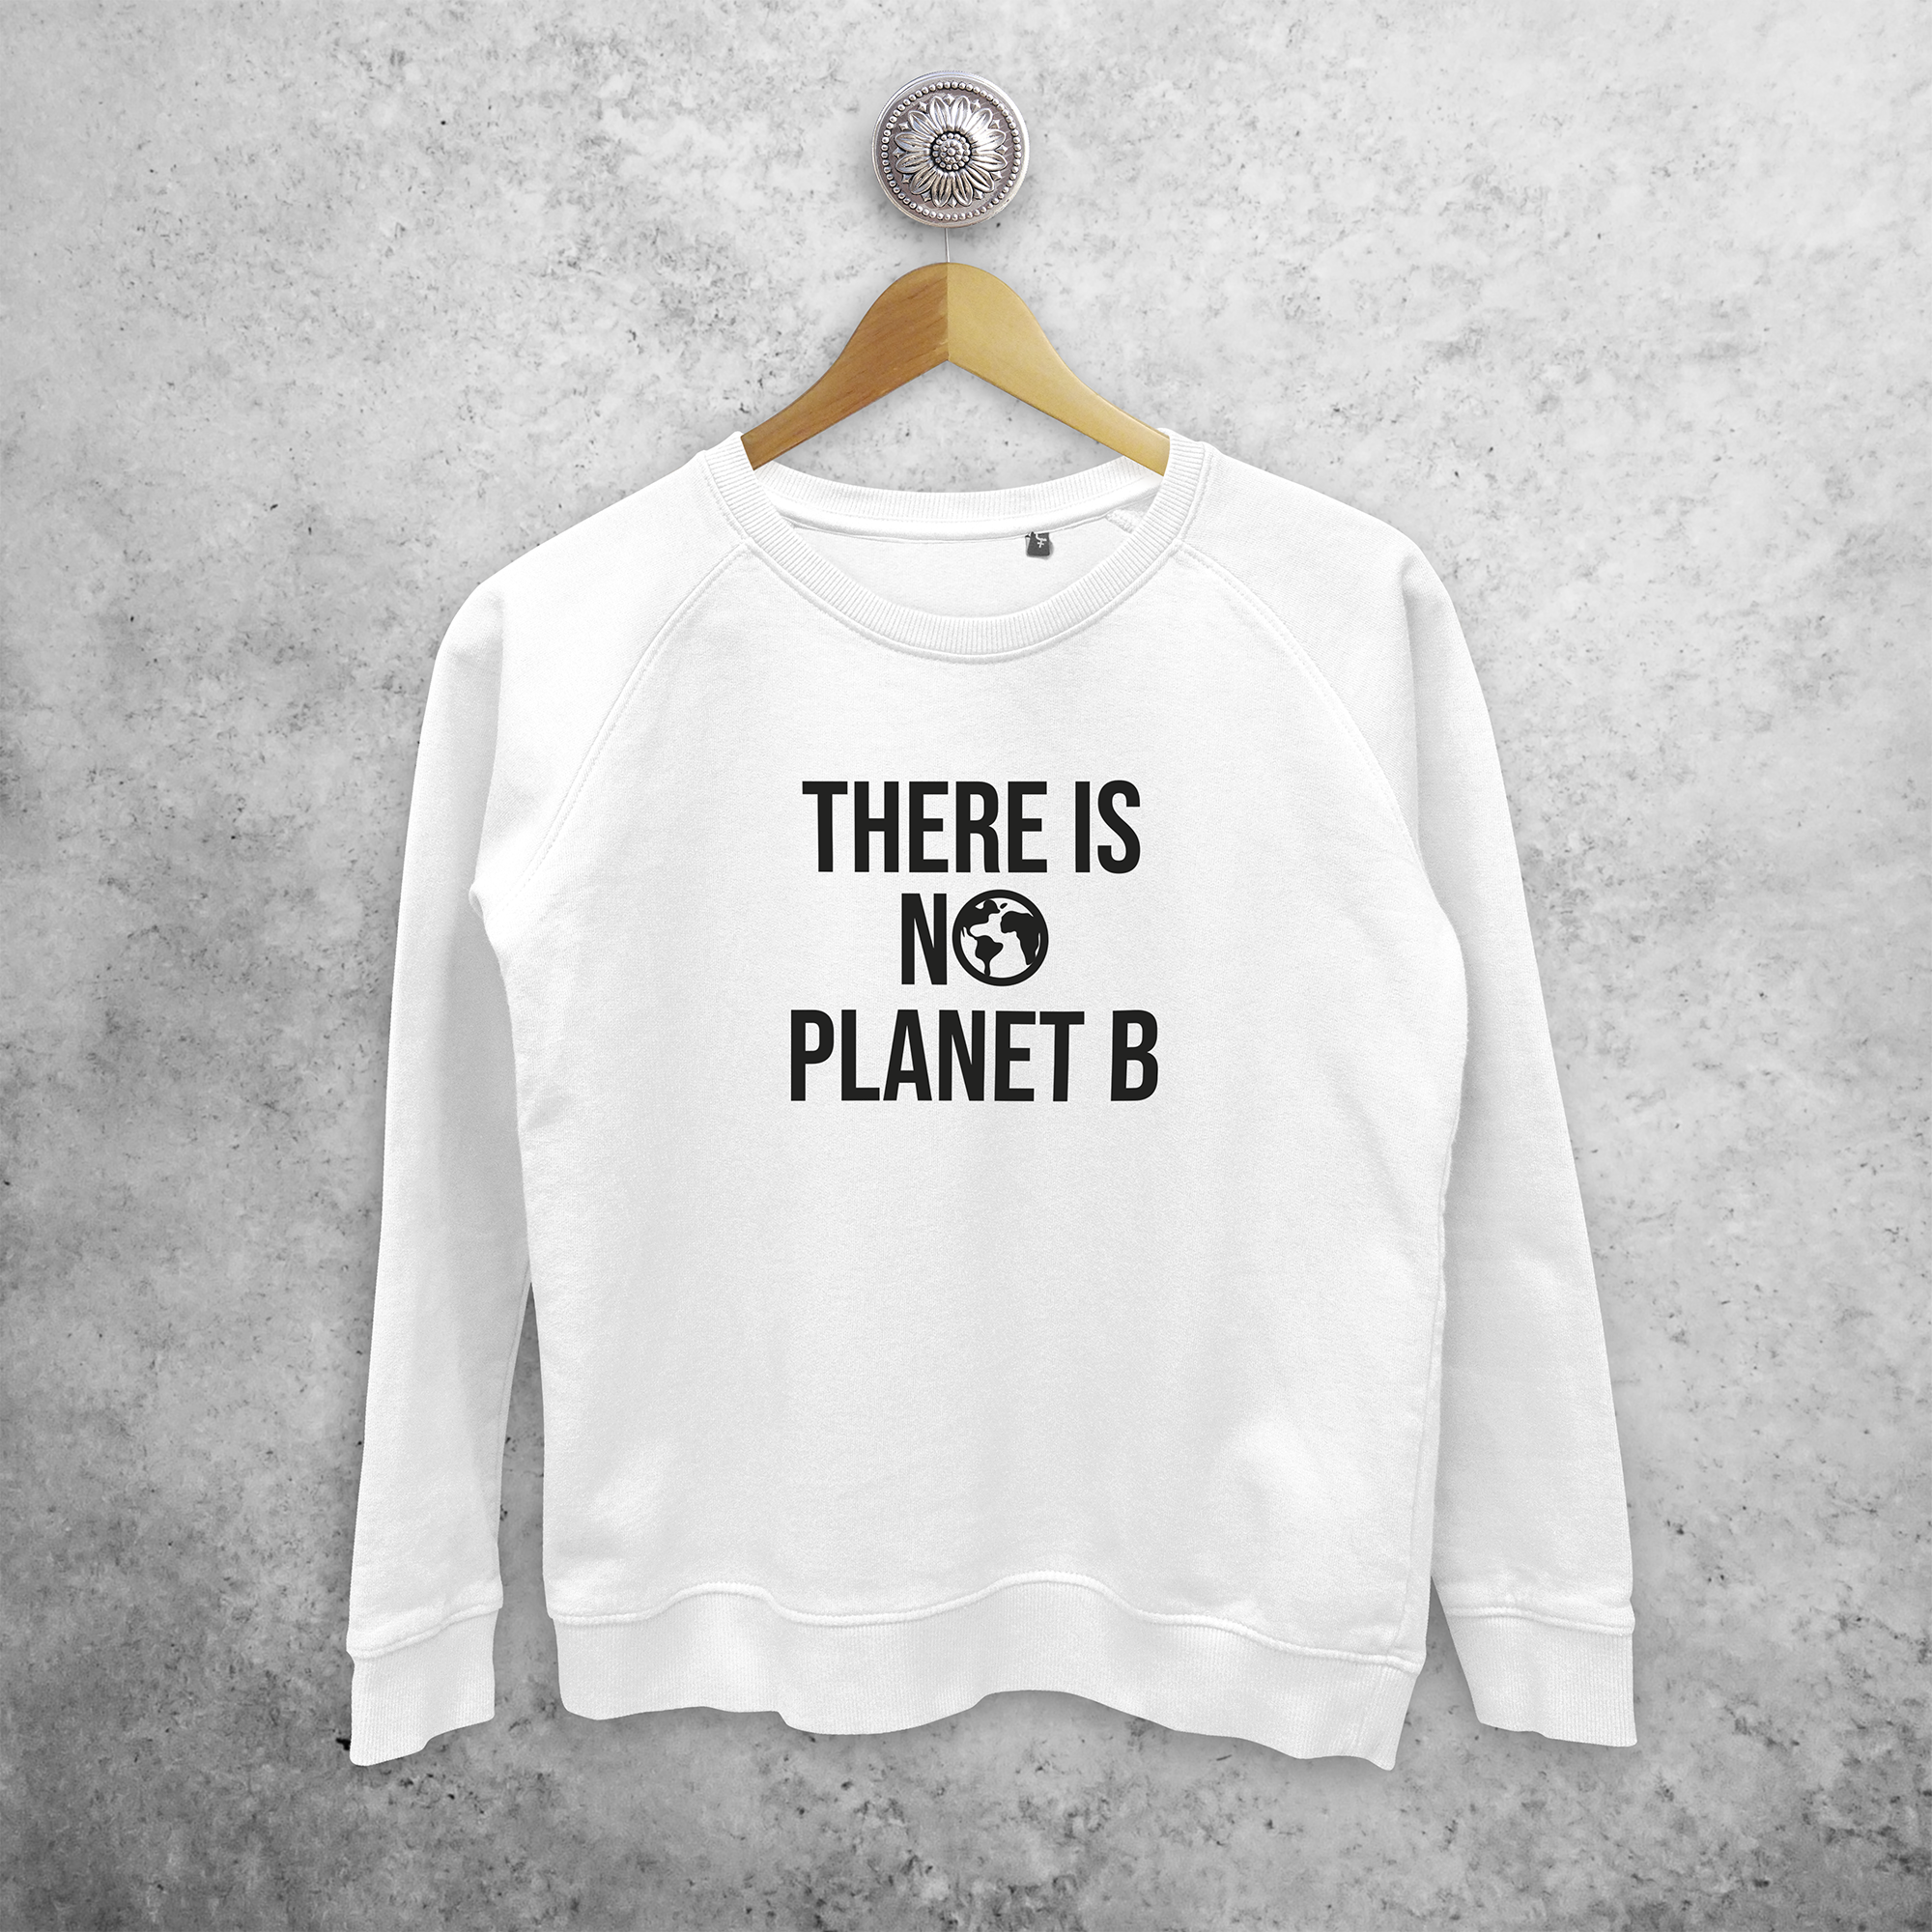 'There is no planet B' sweater